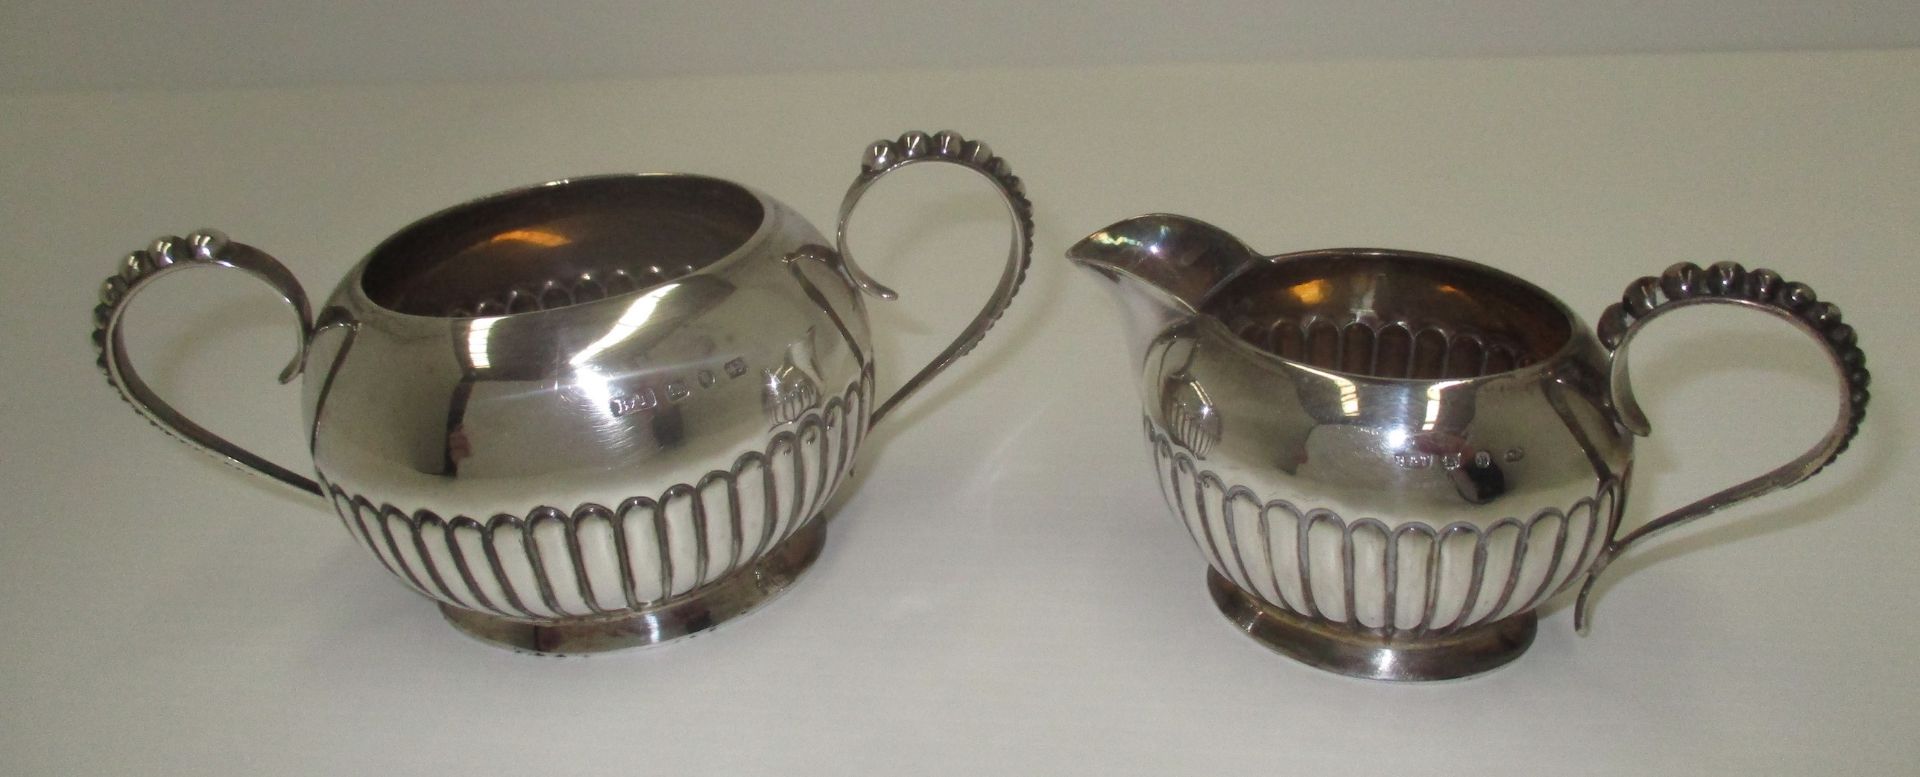 A Victorian silver sugar and cream set, the oval bodies with gadroon decoration and beaded handles, - Image 2 of 2